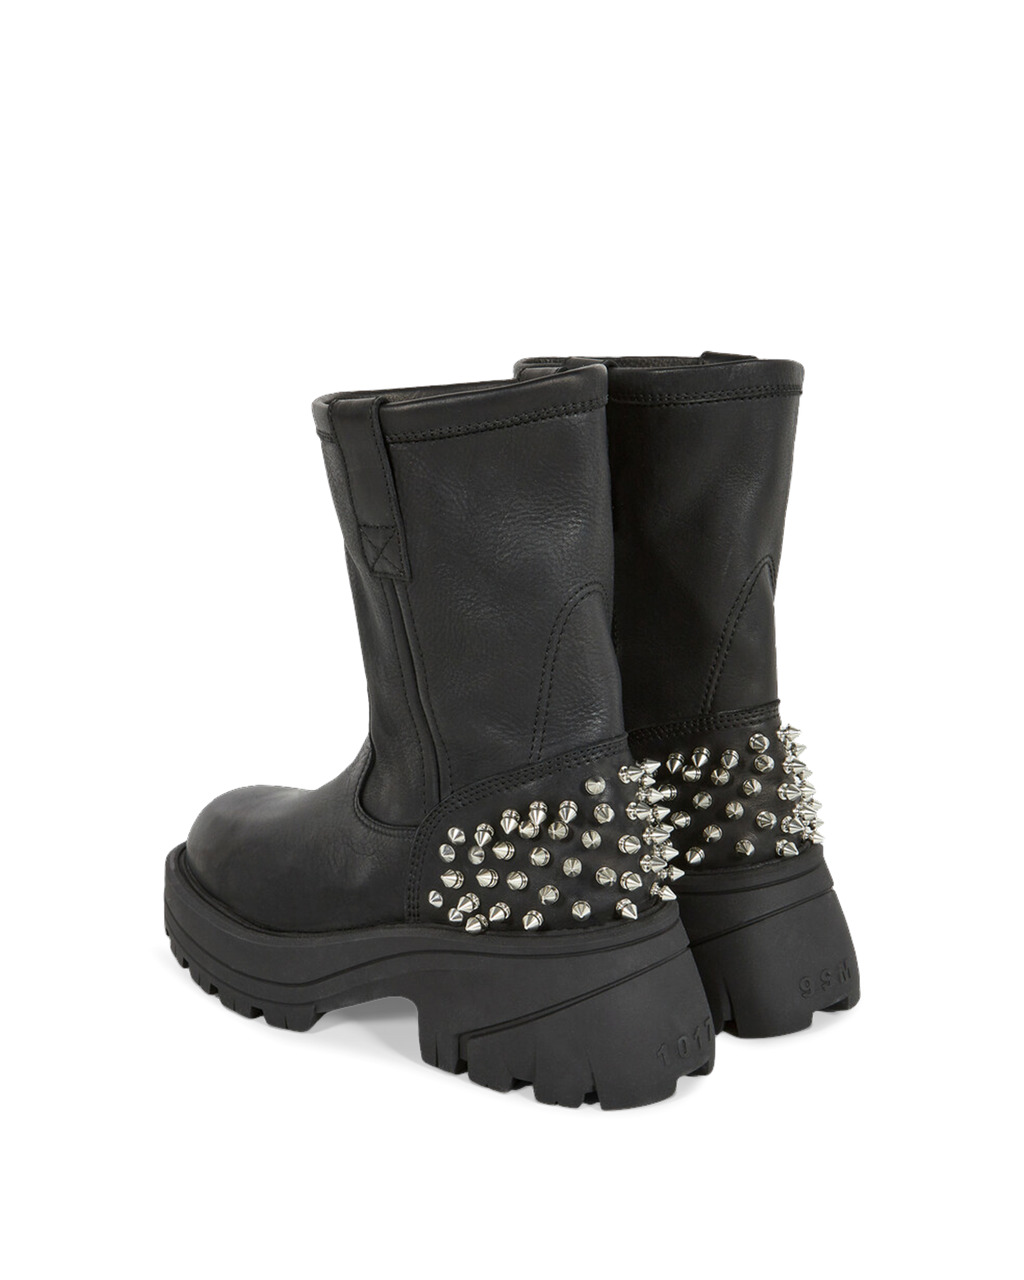 WORK BOOT WITH STUDS (C) - 4